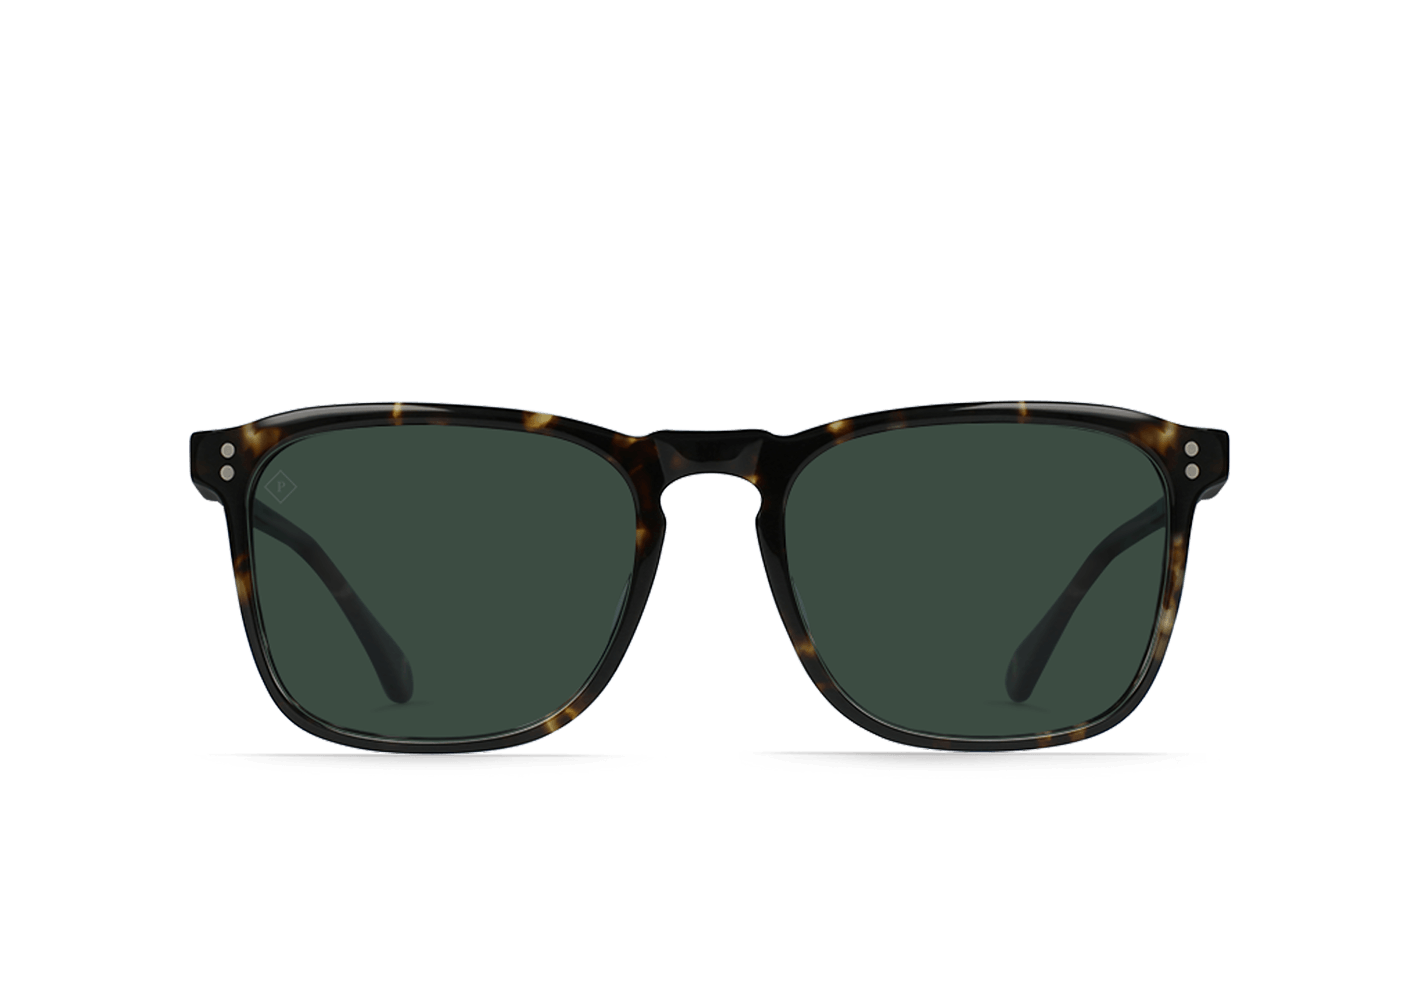 WILEY-Brindle Tort/Green Polarized Men's Square Sunglasses 